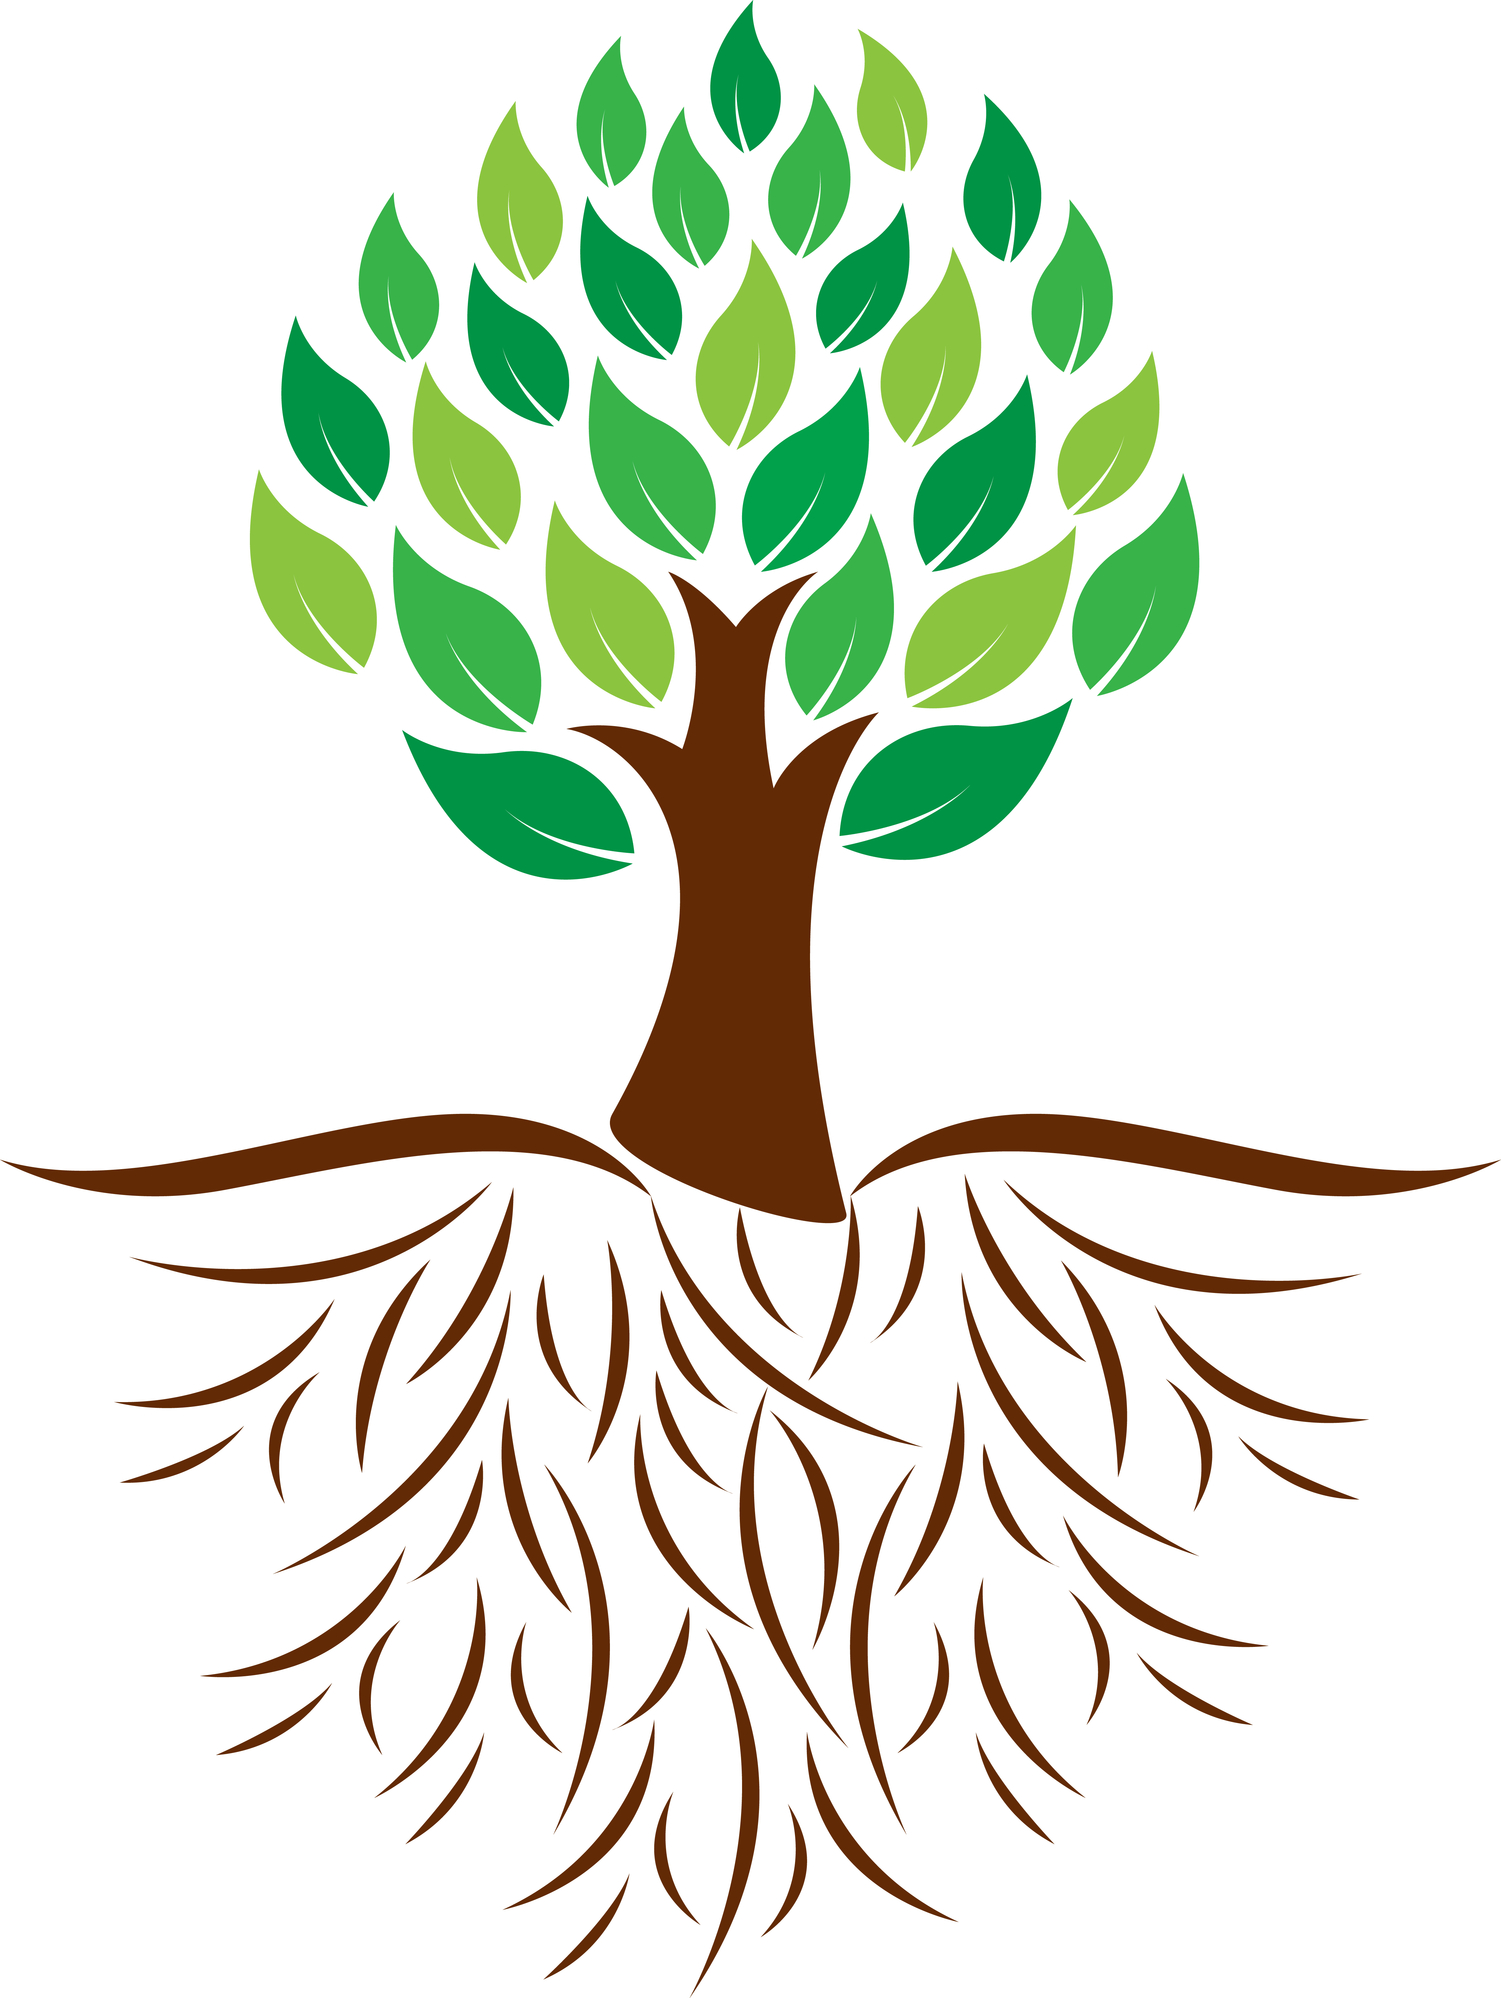 Clip Art Tree With Roots | Clipart library - Free Clipart Images